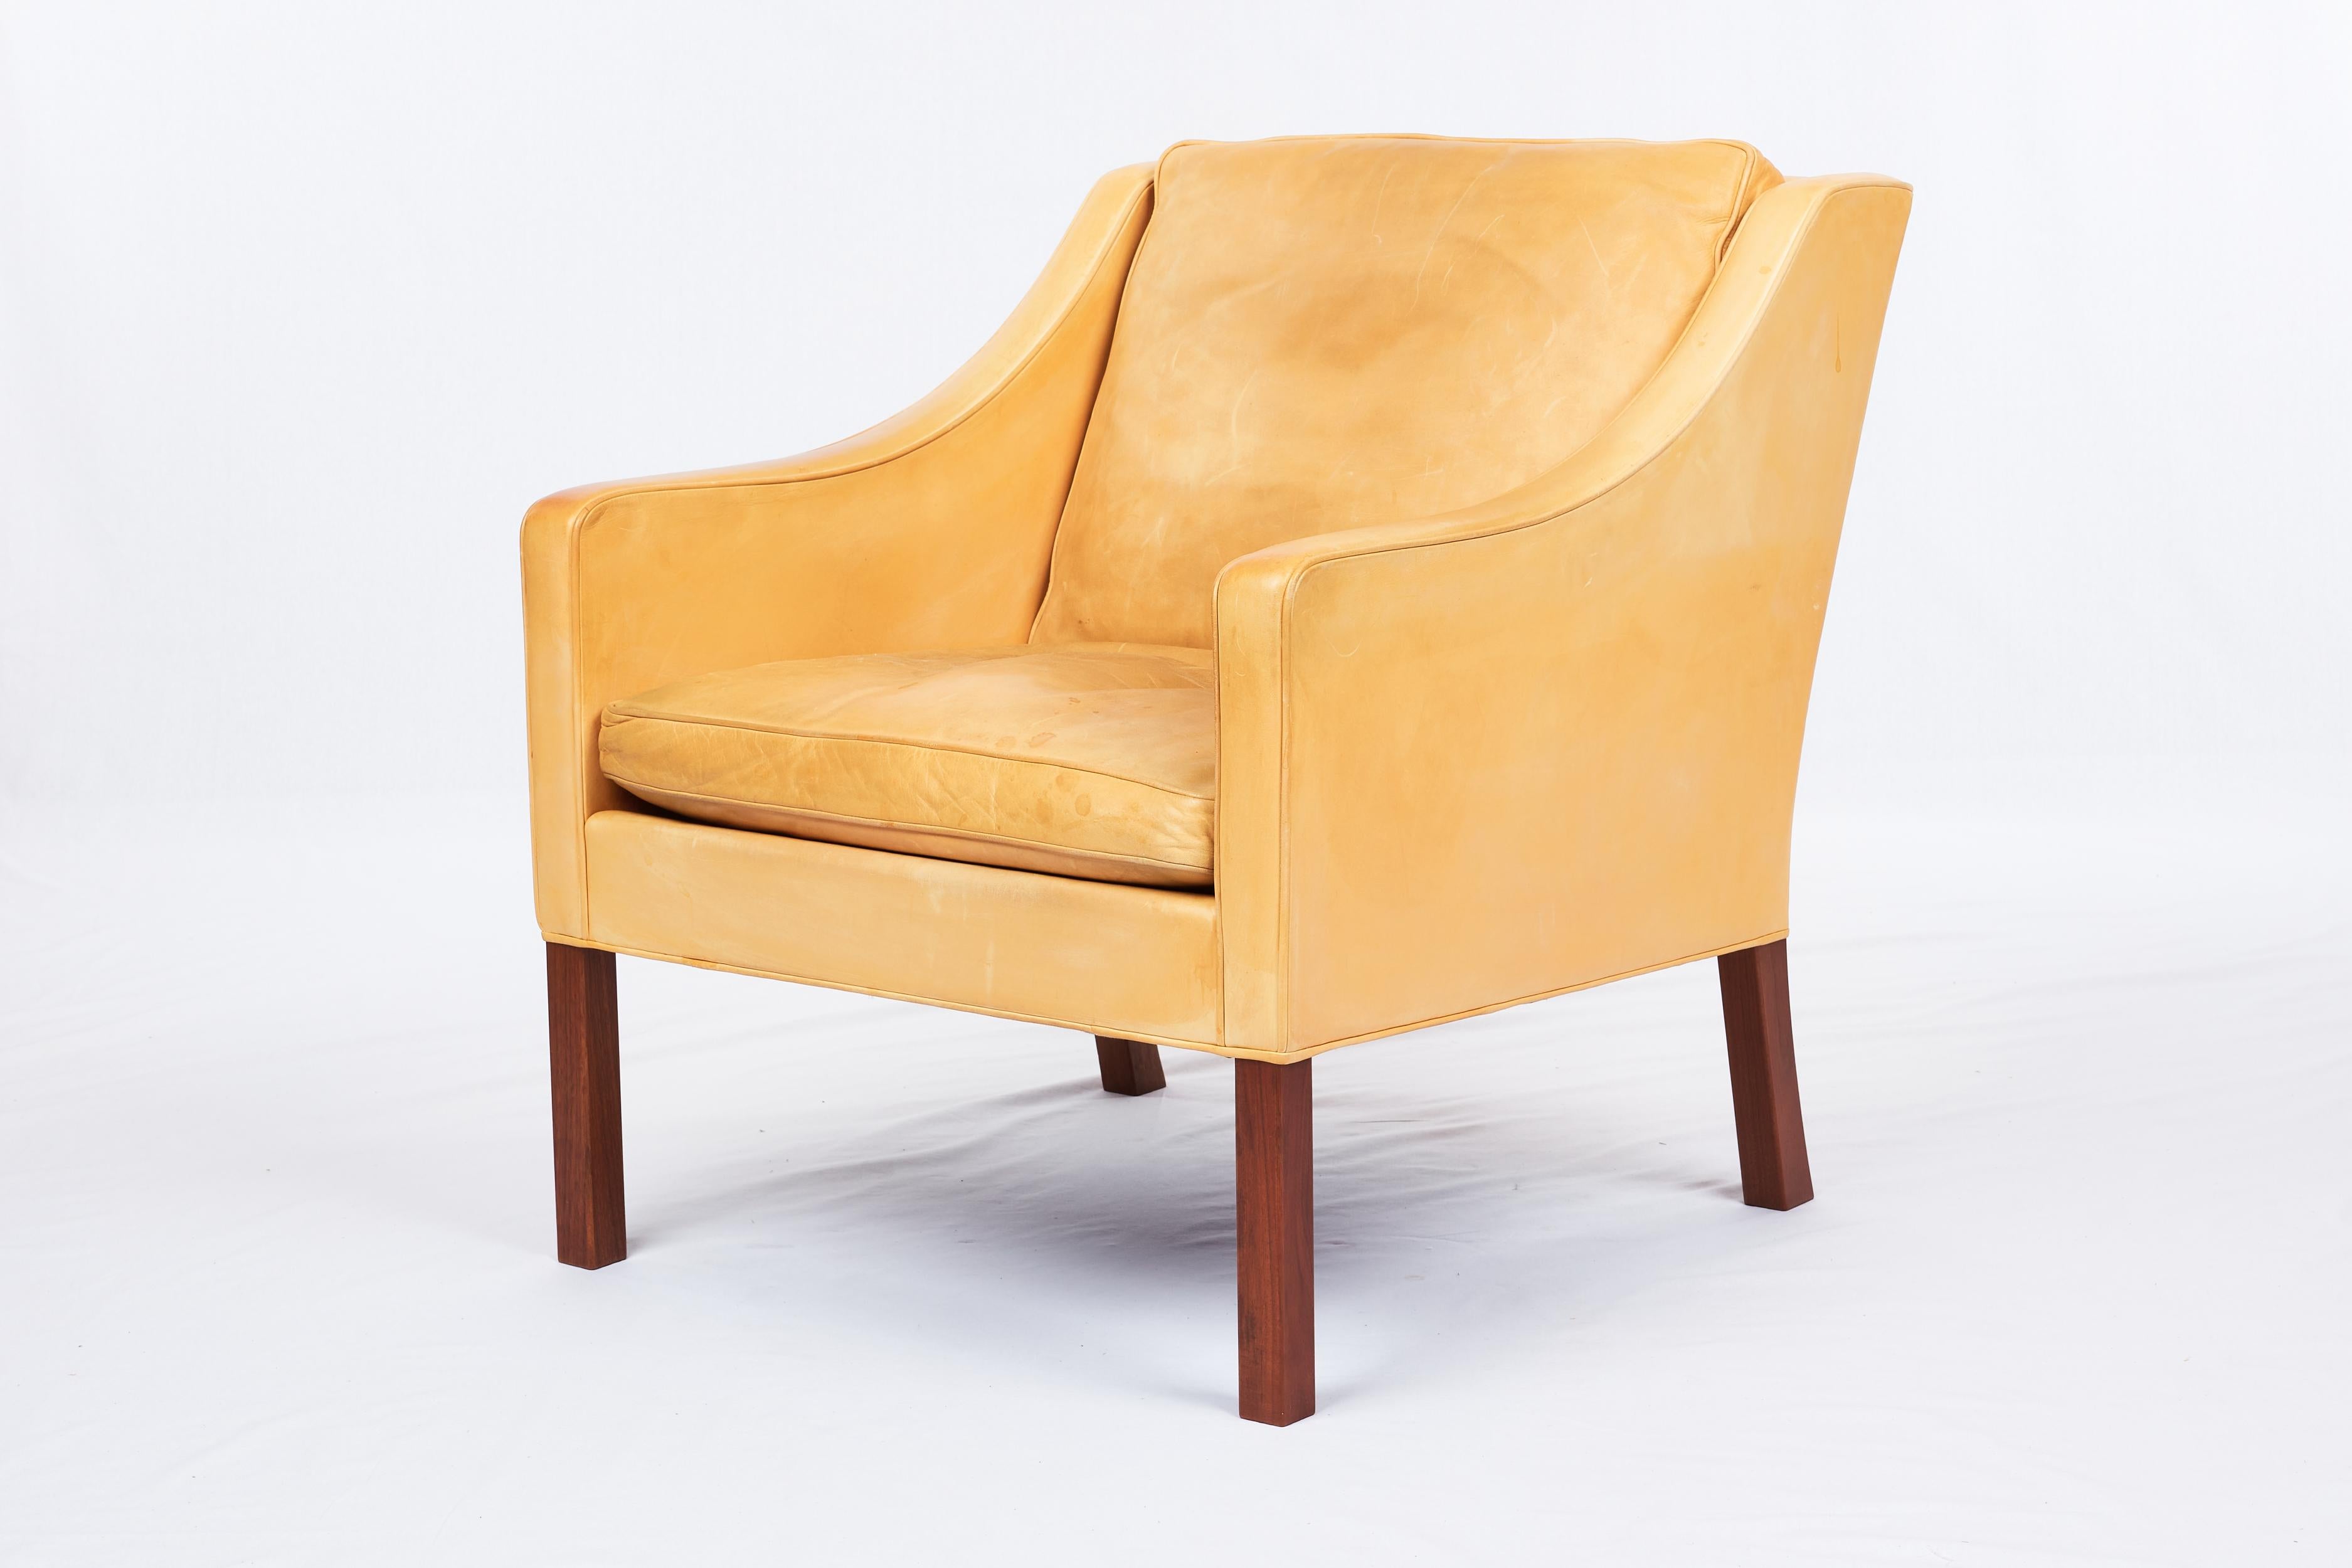 Borge Mogensen Model #2207 leather lounge chair produced by Fredericia Mobelfabrik.